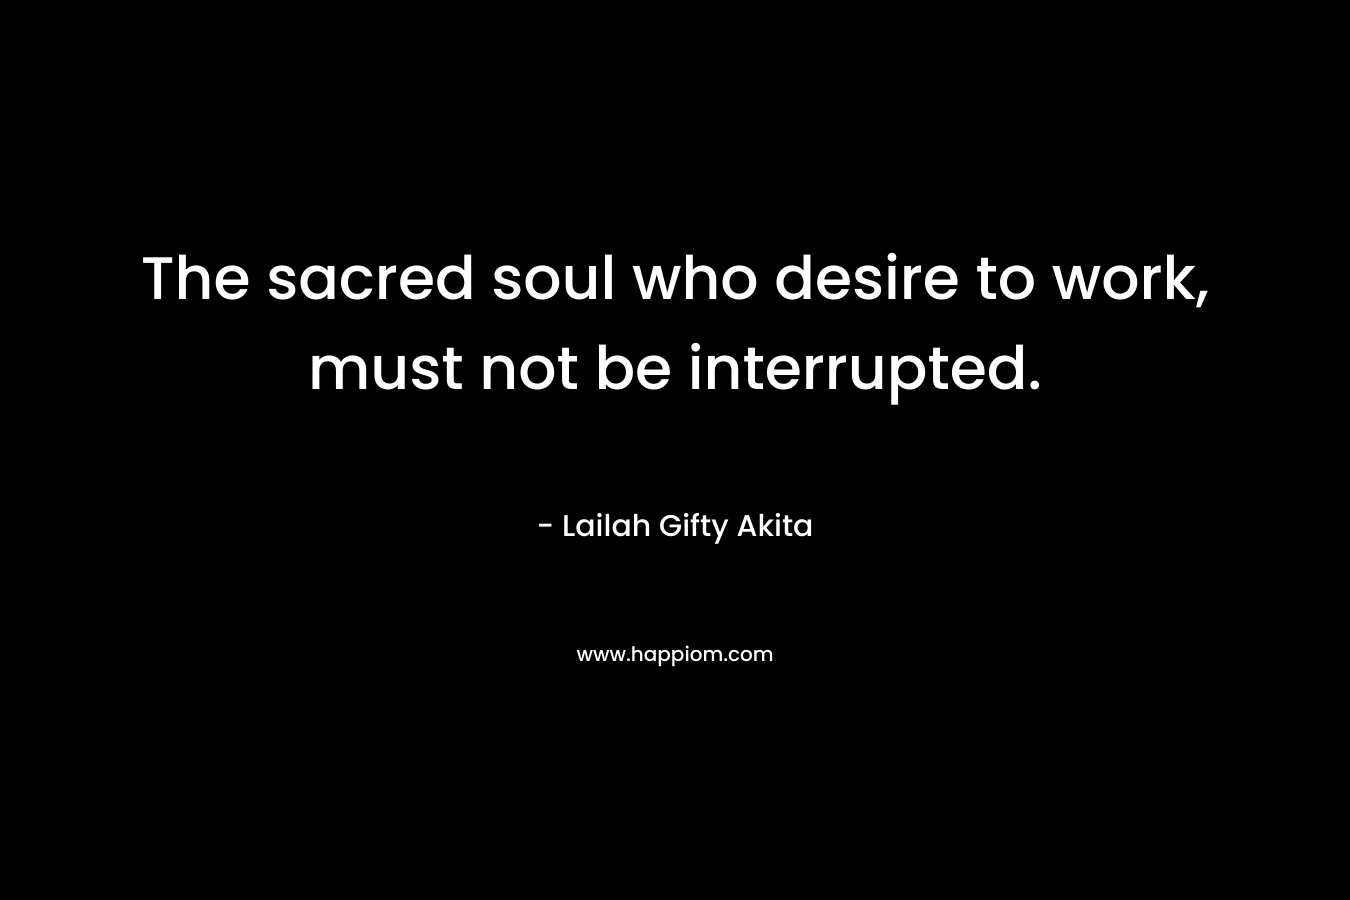 The sacred soul who desire to work, must not be interrupted. – Lailah Gifty Akita